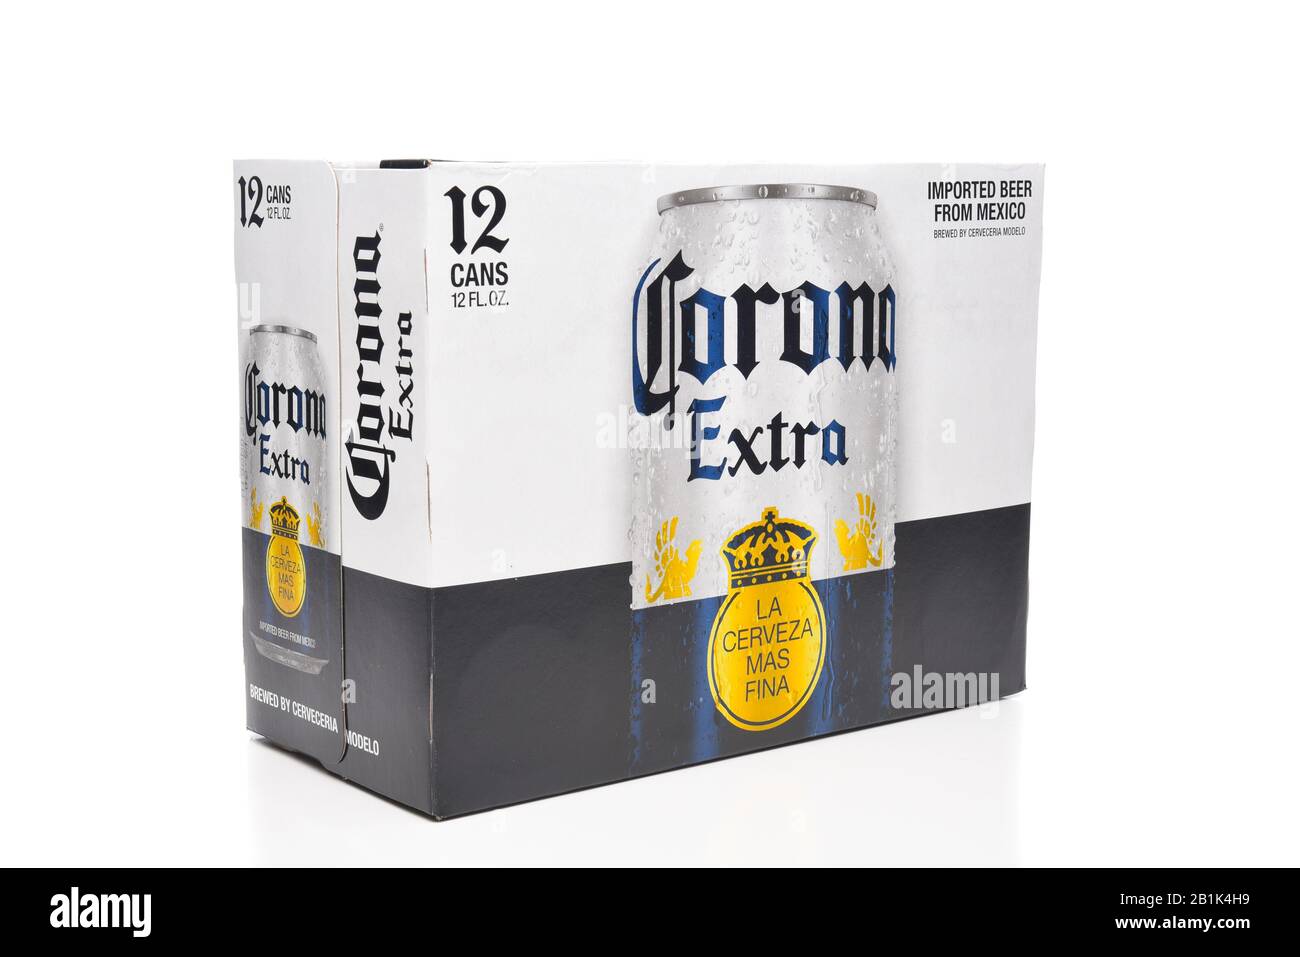 IRVINE, CALIFORNIA - MARCH 21, 2018: 12 pack of Corona Extra Beer Cans. Corona is the most popular imported beer in the USA. Stock Photo